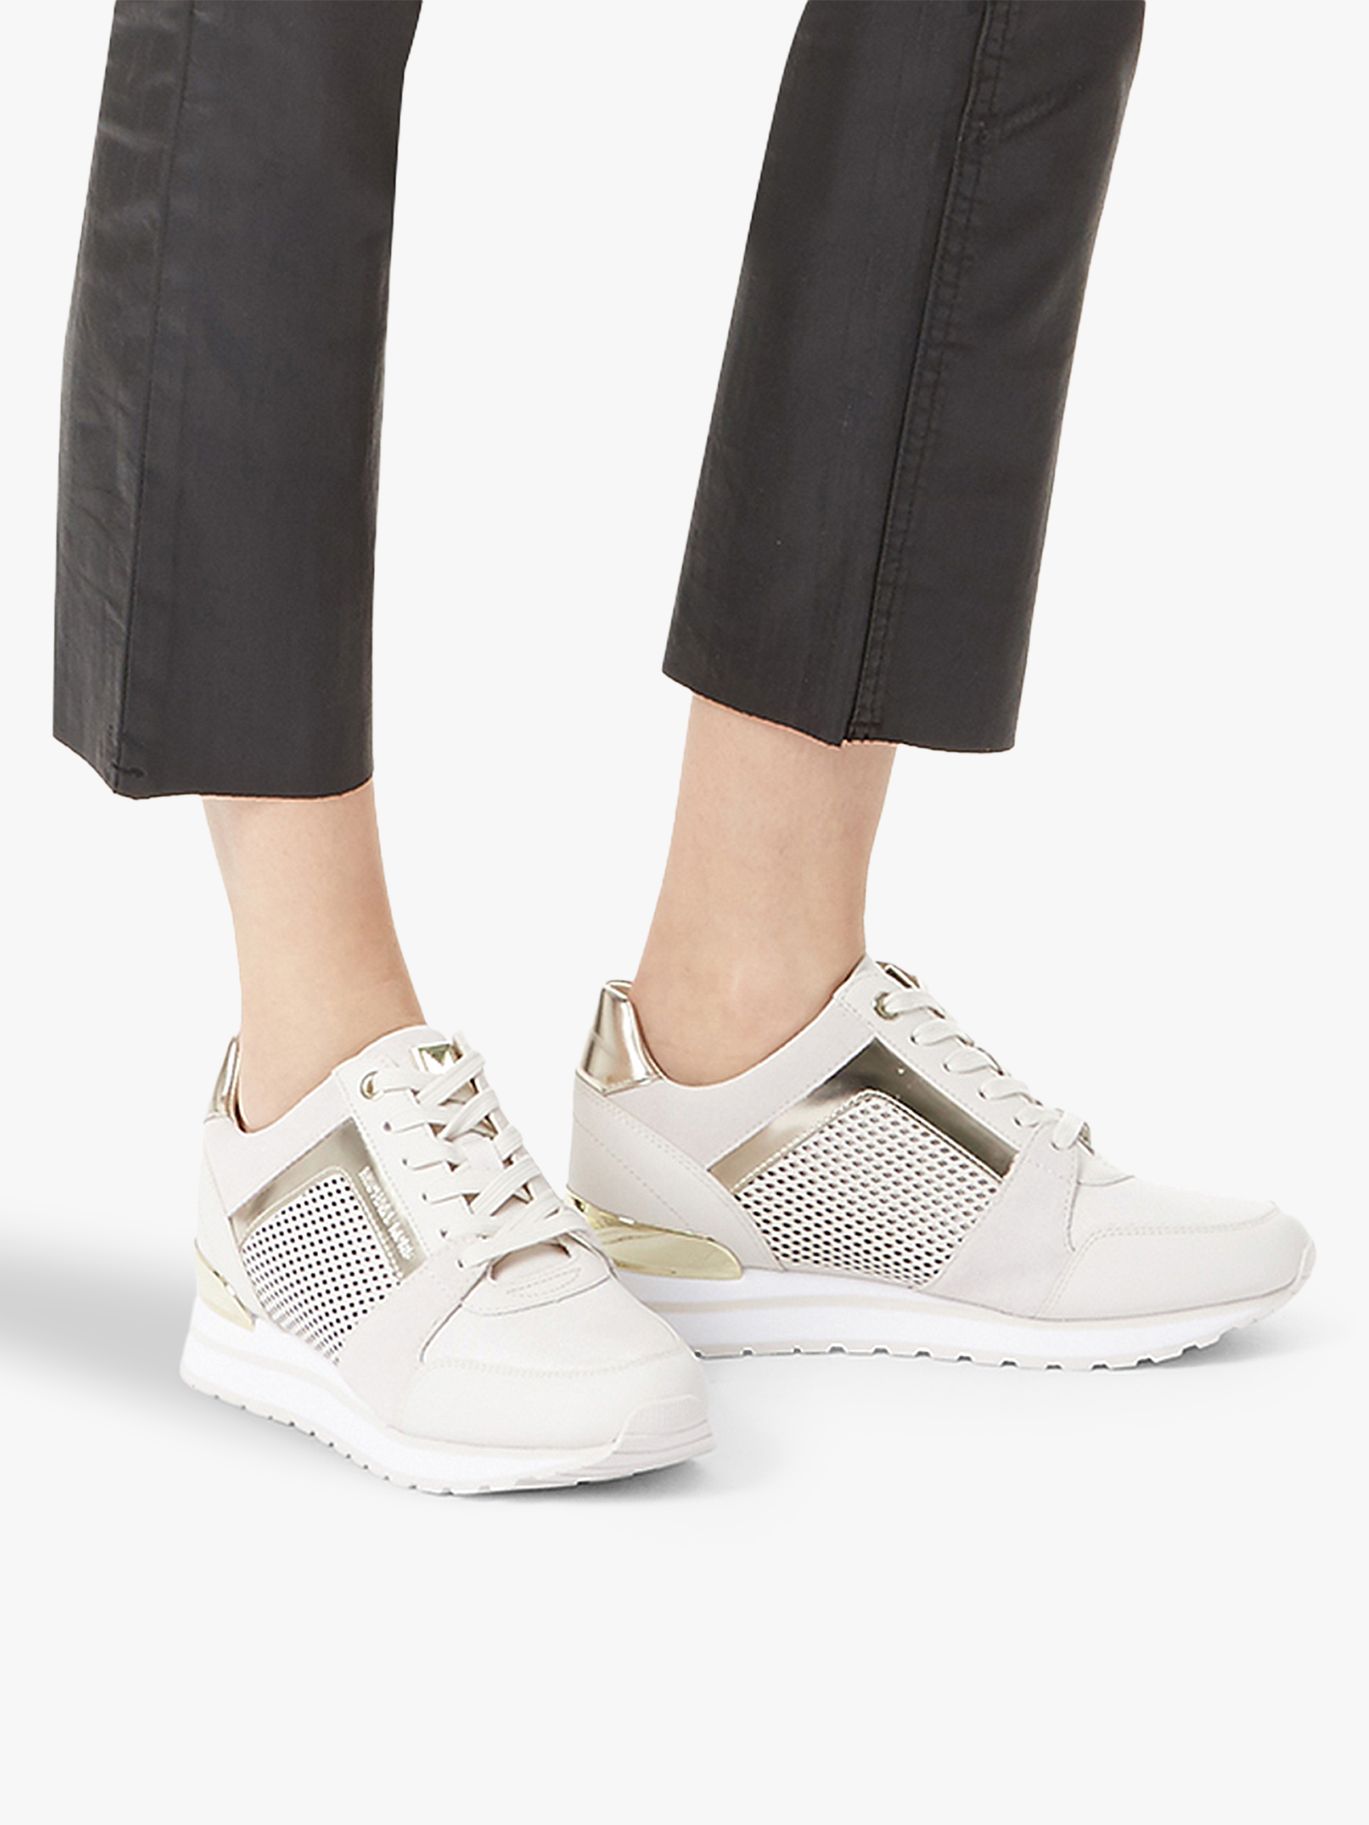 michael kors billie trainer lace up sneakers